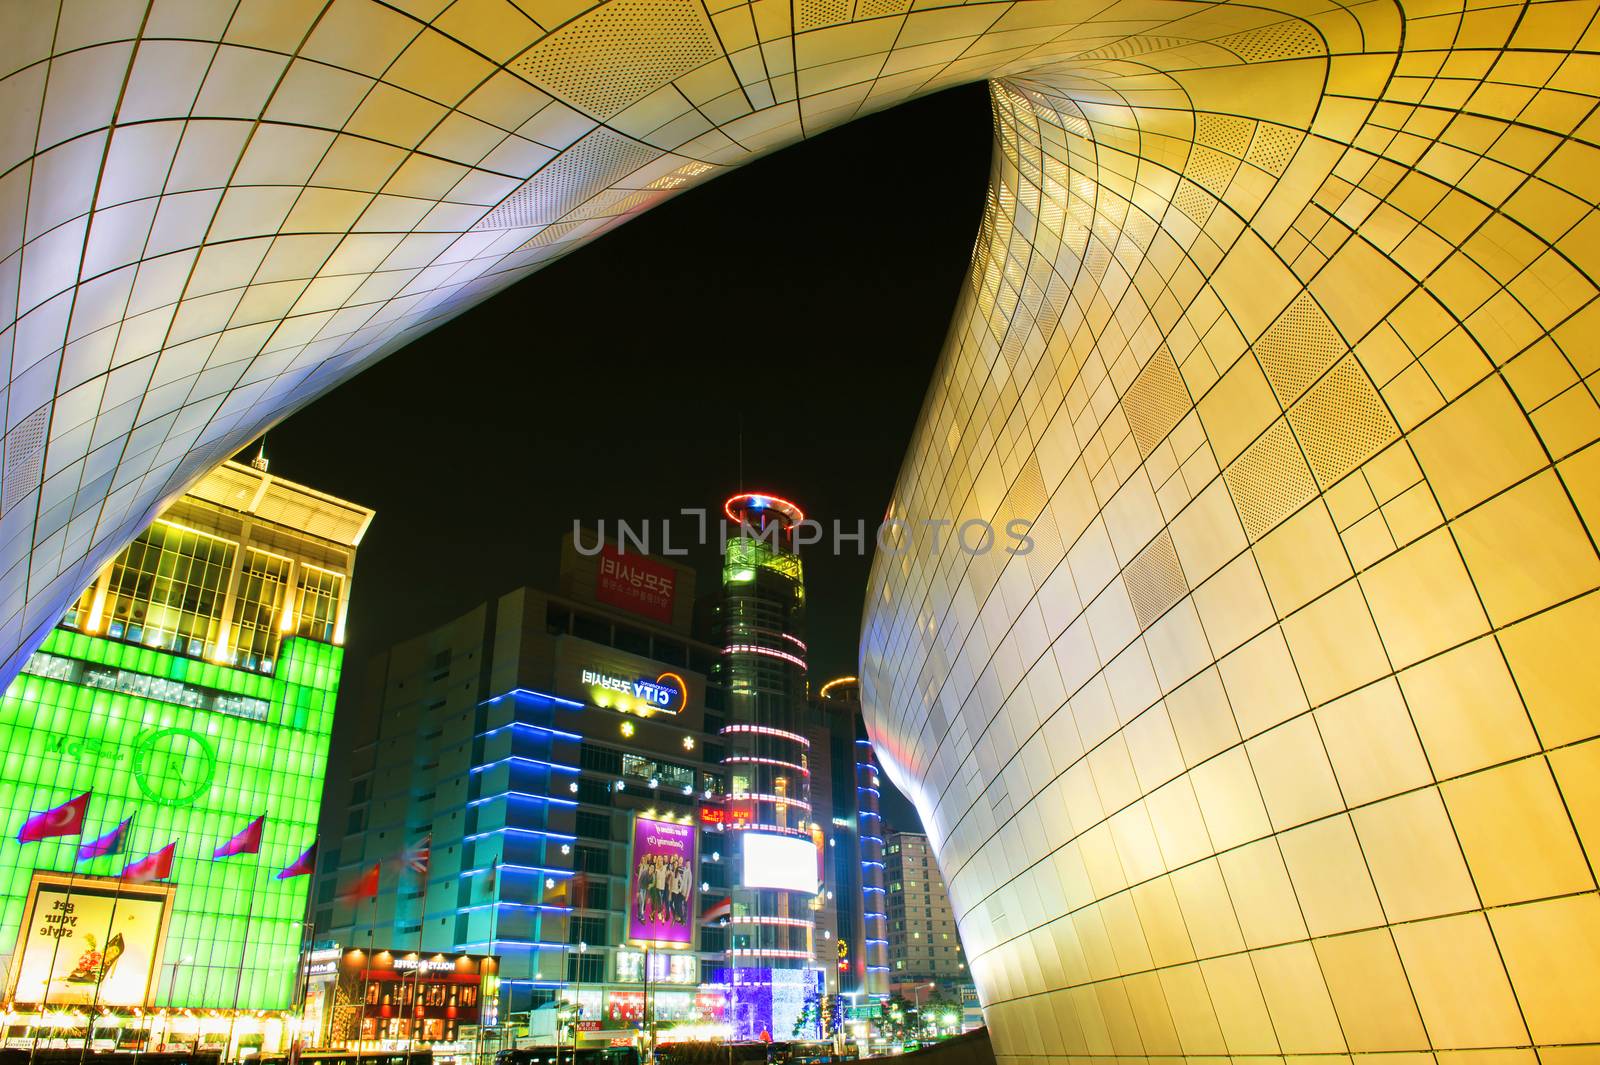 Dongdaemun Design Plaza is a modern architecture in Seoul designed by Zaha Hadid. by gutarphotoghaphy